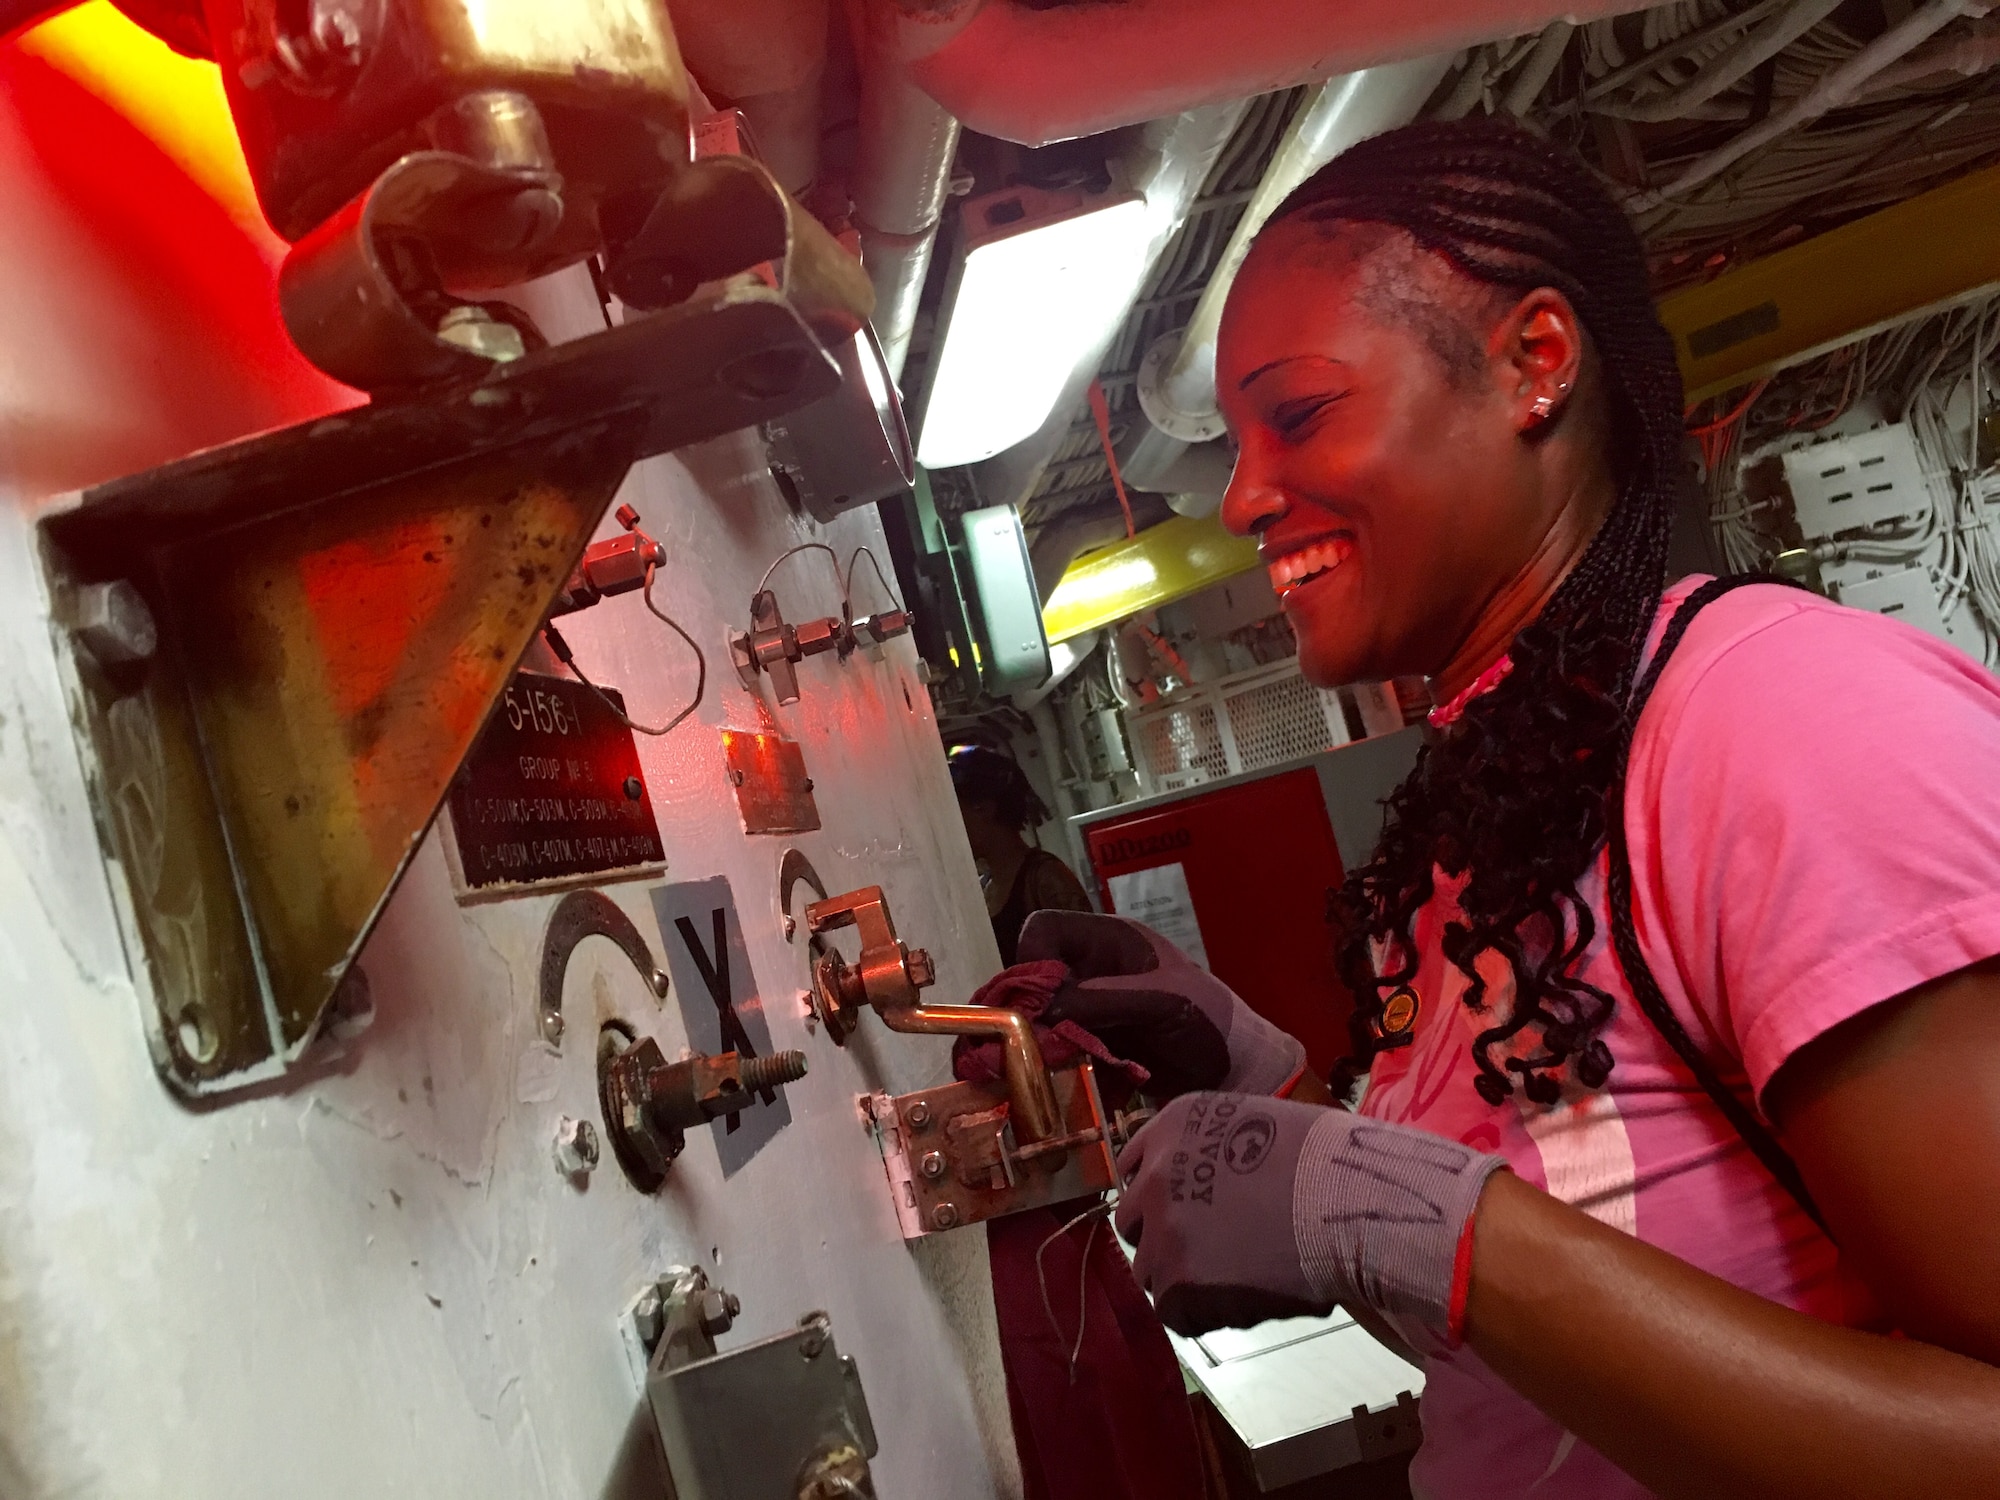 Capt. Anika Vines-Ogle, 419th Medical Squadron, polishes the brass aboard the USS Missouri in Honolulu, Hawaii. About 15 reservists from the 419th Fighter Wing took time on their day off to help clean the historic Navy ship during their two-week training on the island of Oahu. (U.S. Air Force photo/Bryan Magaña)